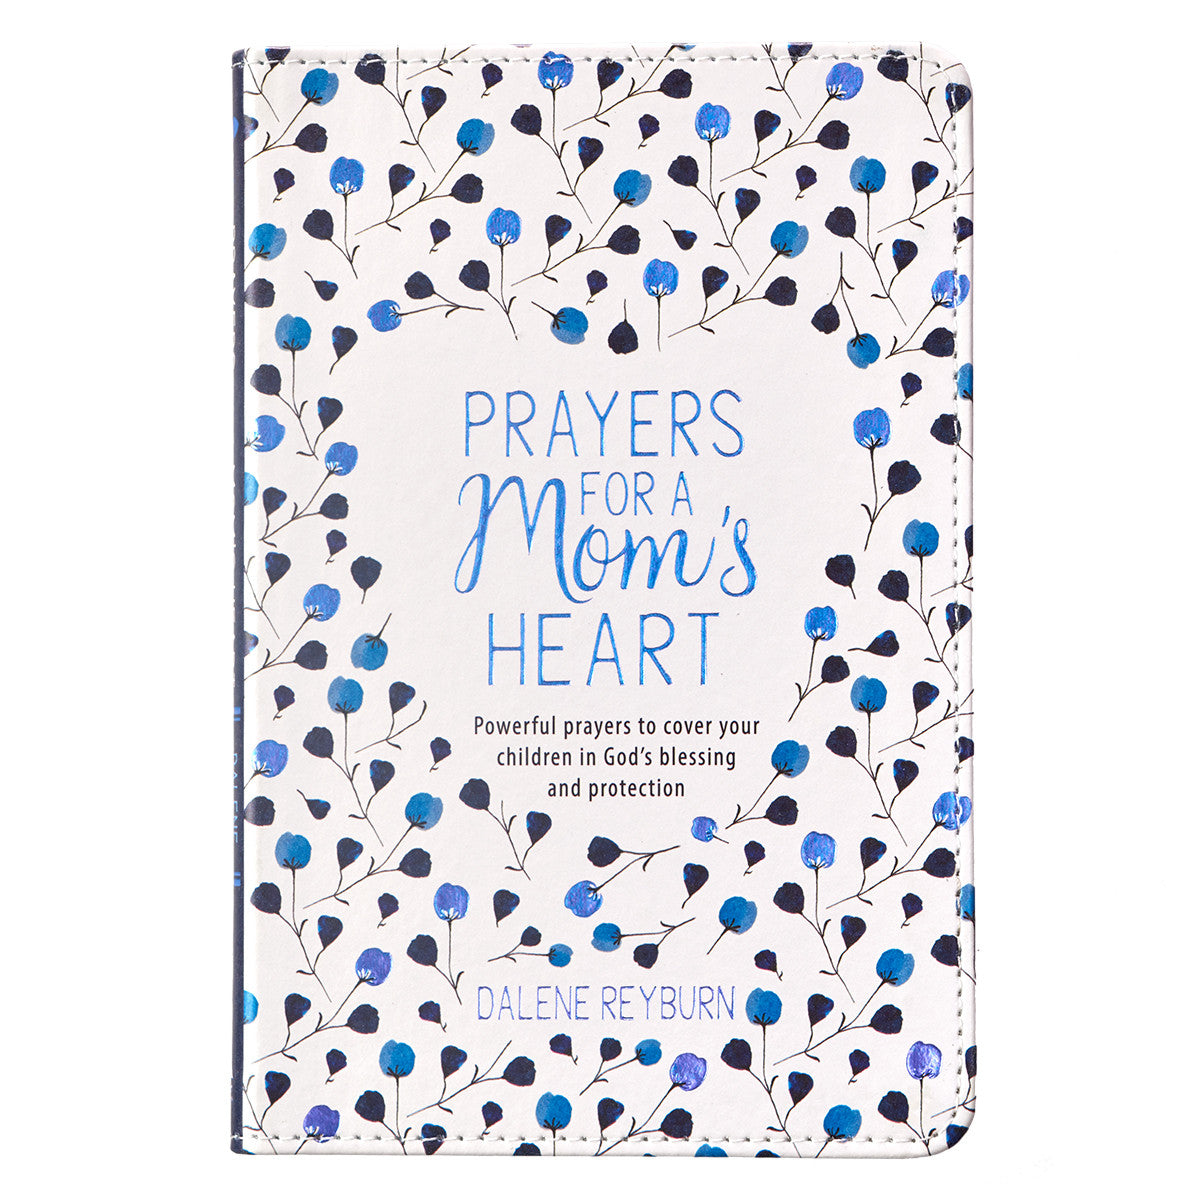 ROCKONLINE | New Creation Church | NCC | Joseph Prince | ROCK Bookshop | ROCK Bookstore | Star Vista | Prayers For A Mom's Heart | Devotional | Free delivery for Singapore Orders above $50.